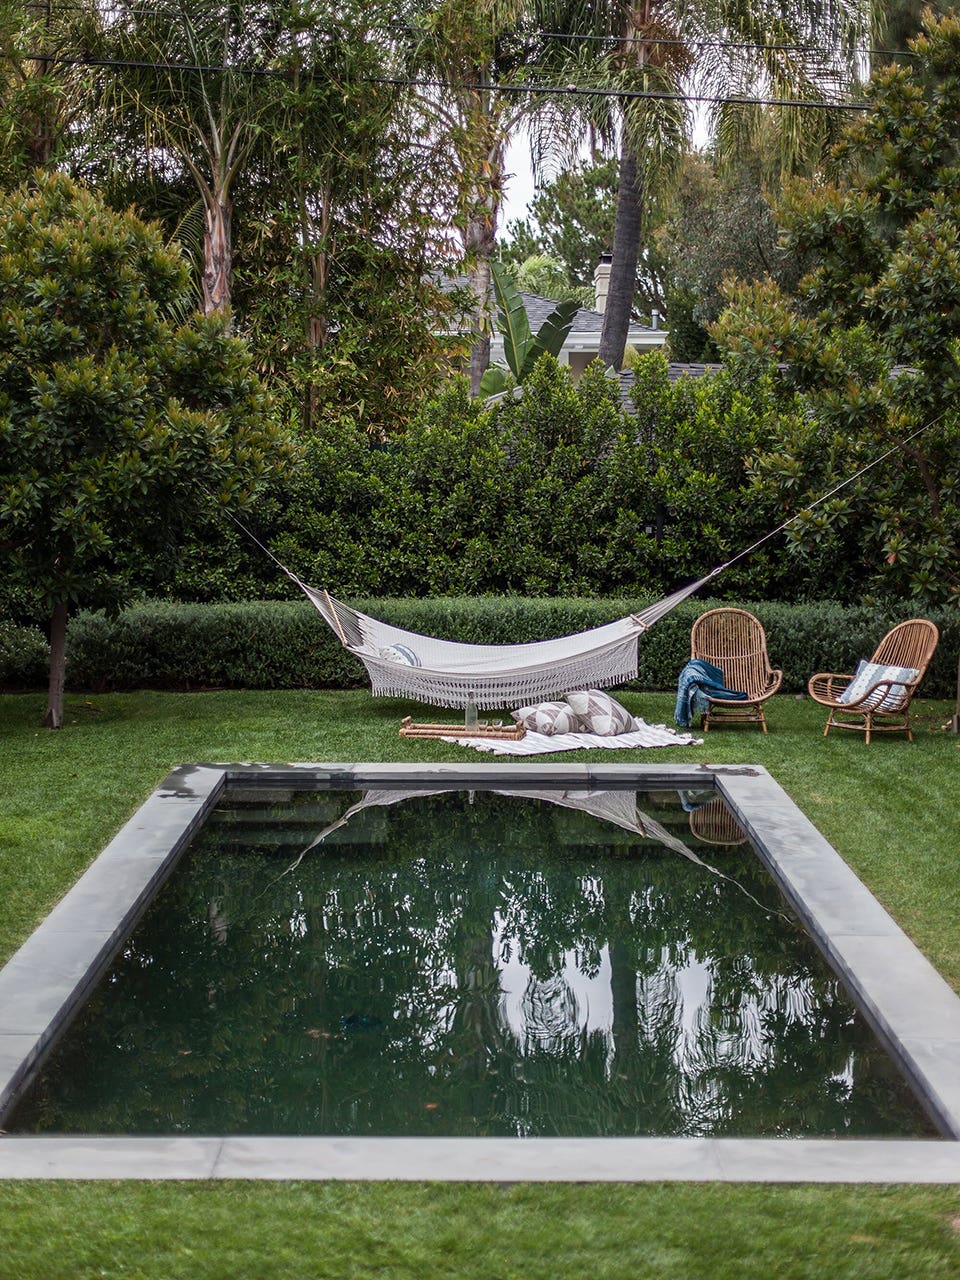 Intense Sofa Sales, Luxe Linen Pajamas, and the Coolest Hammock We’ve Ever Seen